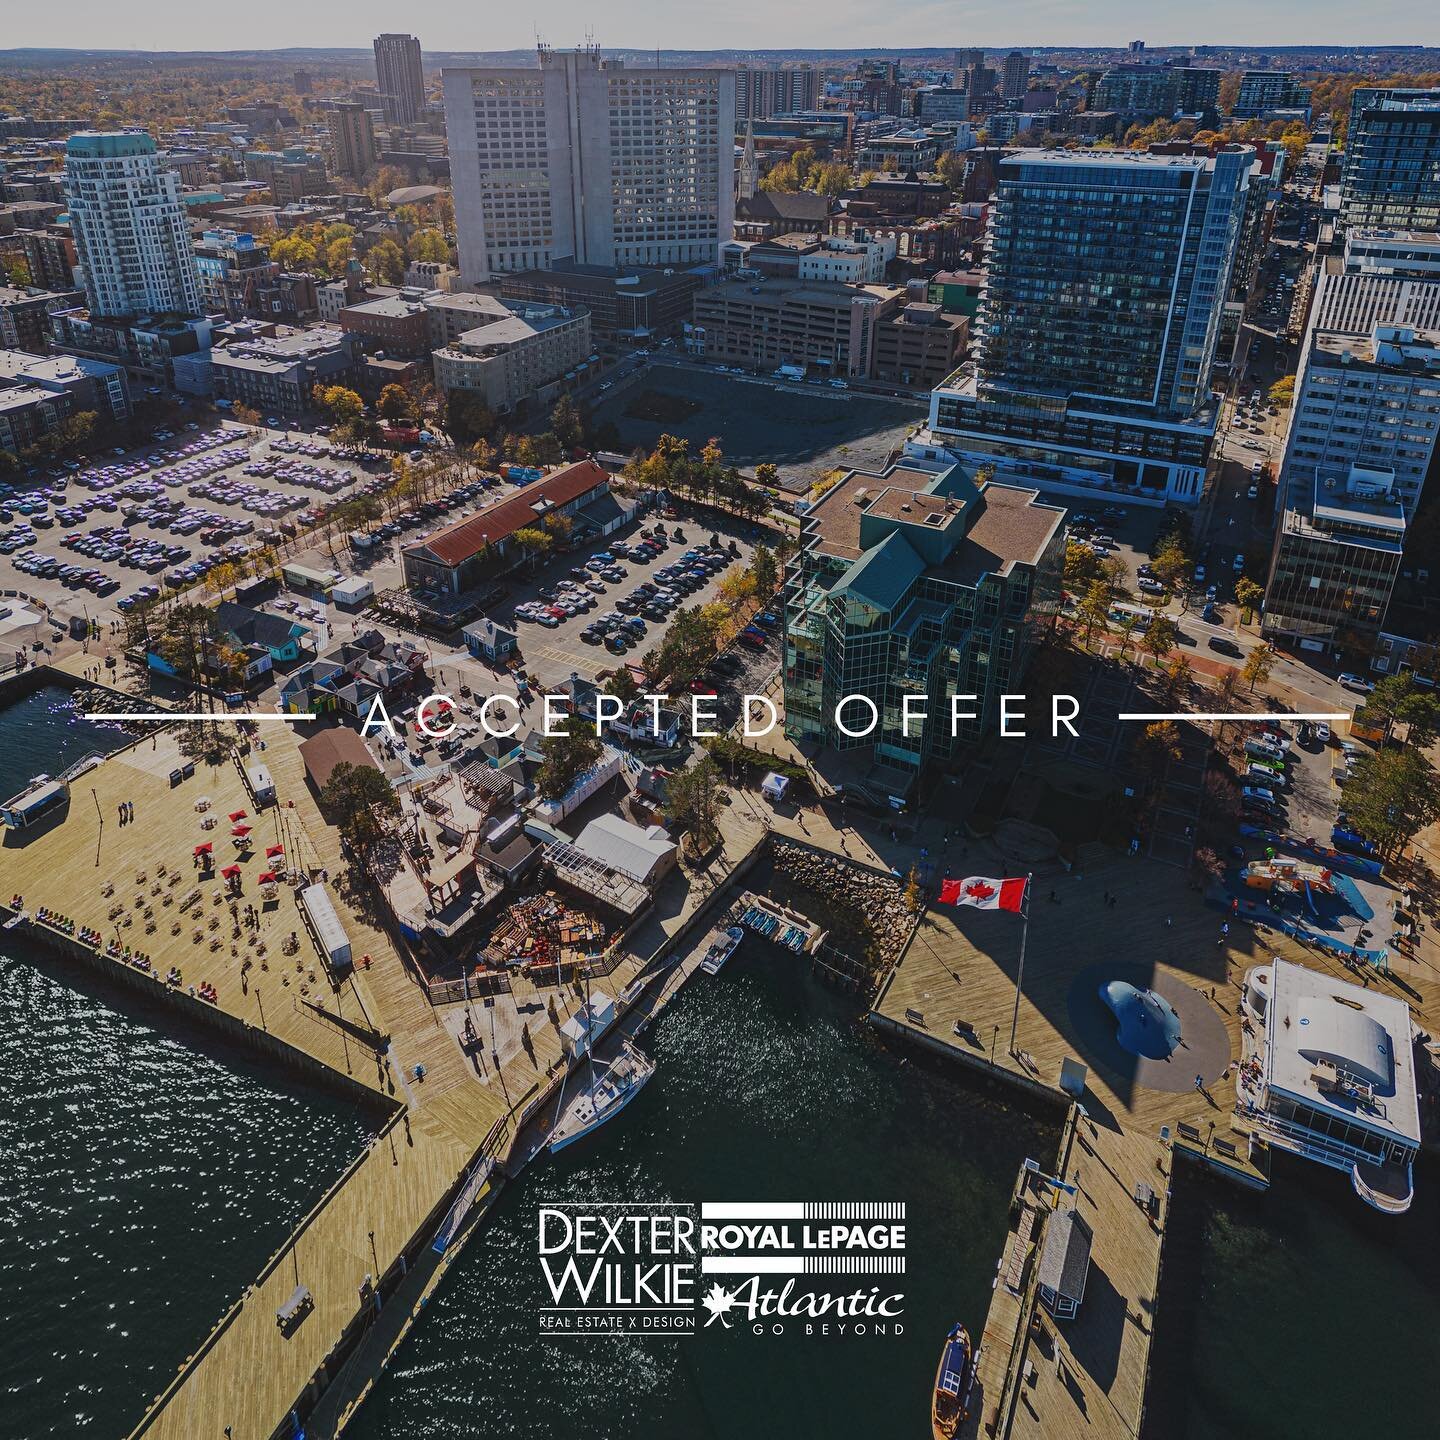 Thrilled to be welcoming my client to my favourite neighbourhood (I&rsquo;m a little biased) in less than a month! 

Congratulations on your #AcceptedOffer neighbour! 👋🏼🏢

📱1.902.314.9686 
📧dexter@dexterwilkie.com 
👨🏻&zwj;💻www.dexterwilkie.co